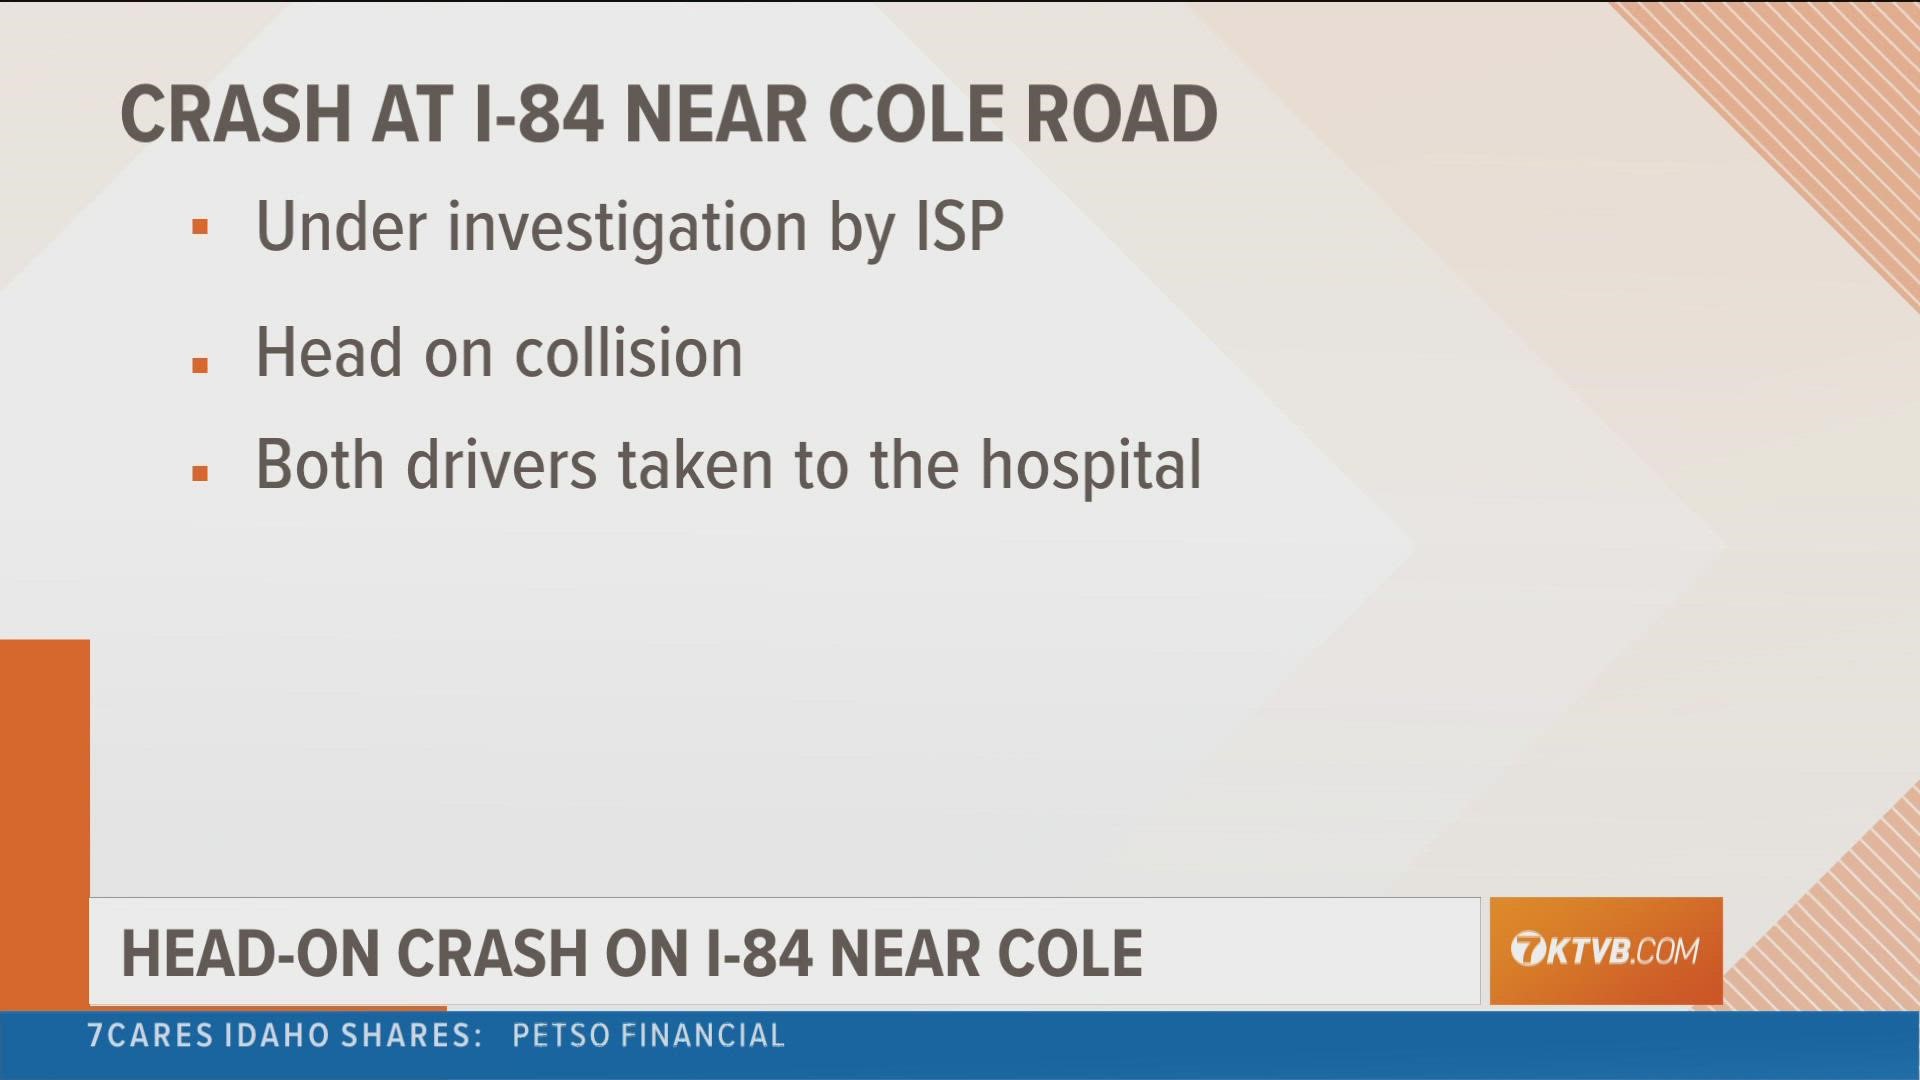 According to ISP, a 33-year-old Boise man traveling westbound in the eastbound lanes collided head-on with a car, driven by a 22-year-old man from Meridian.